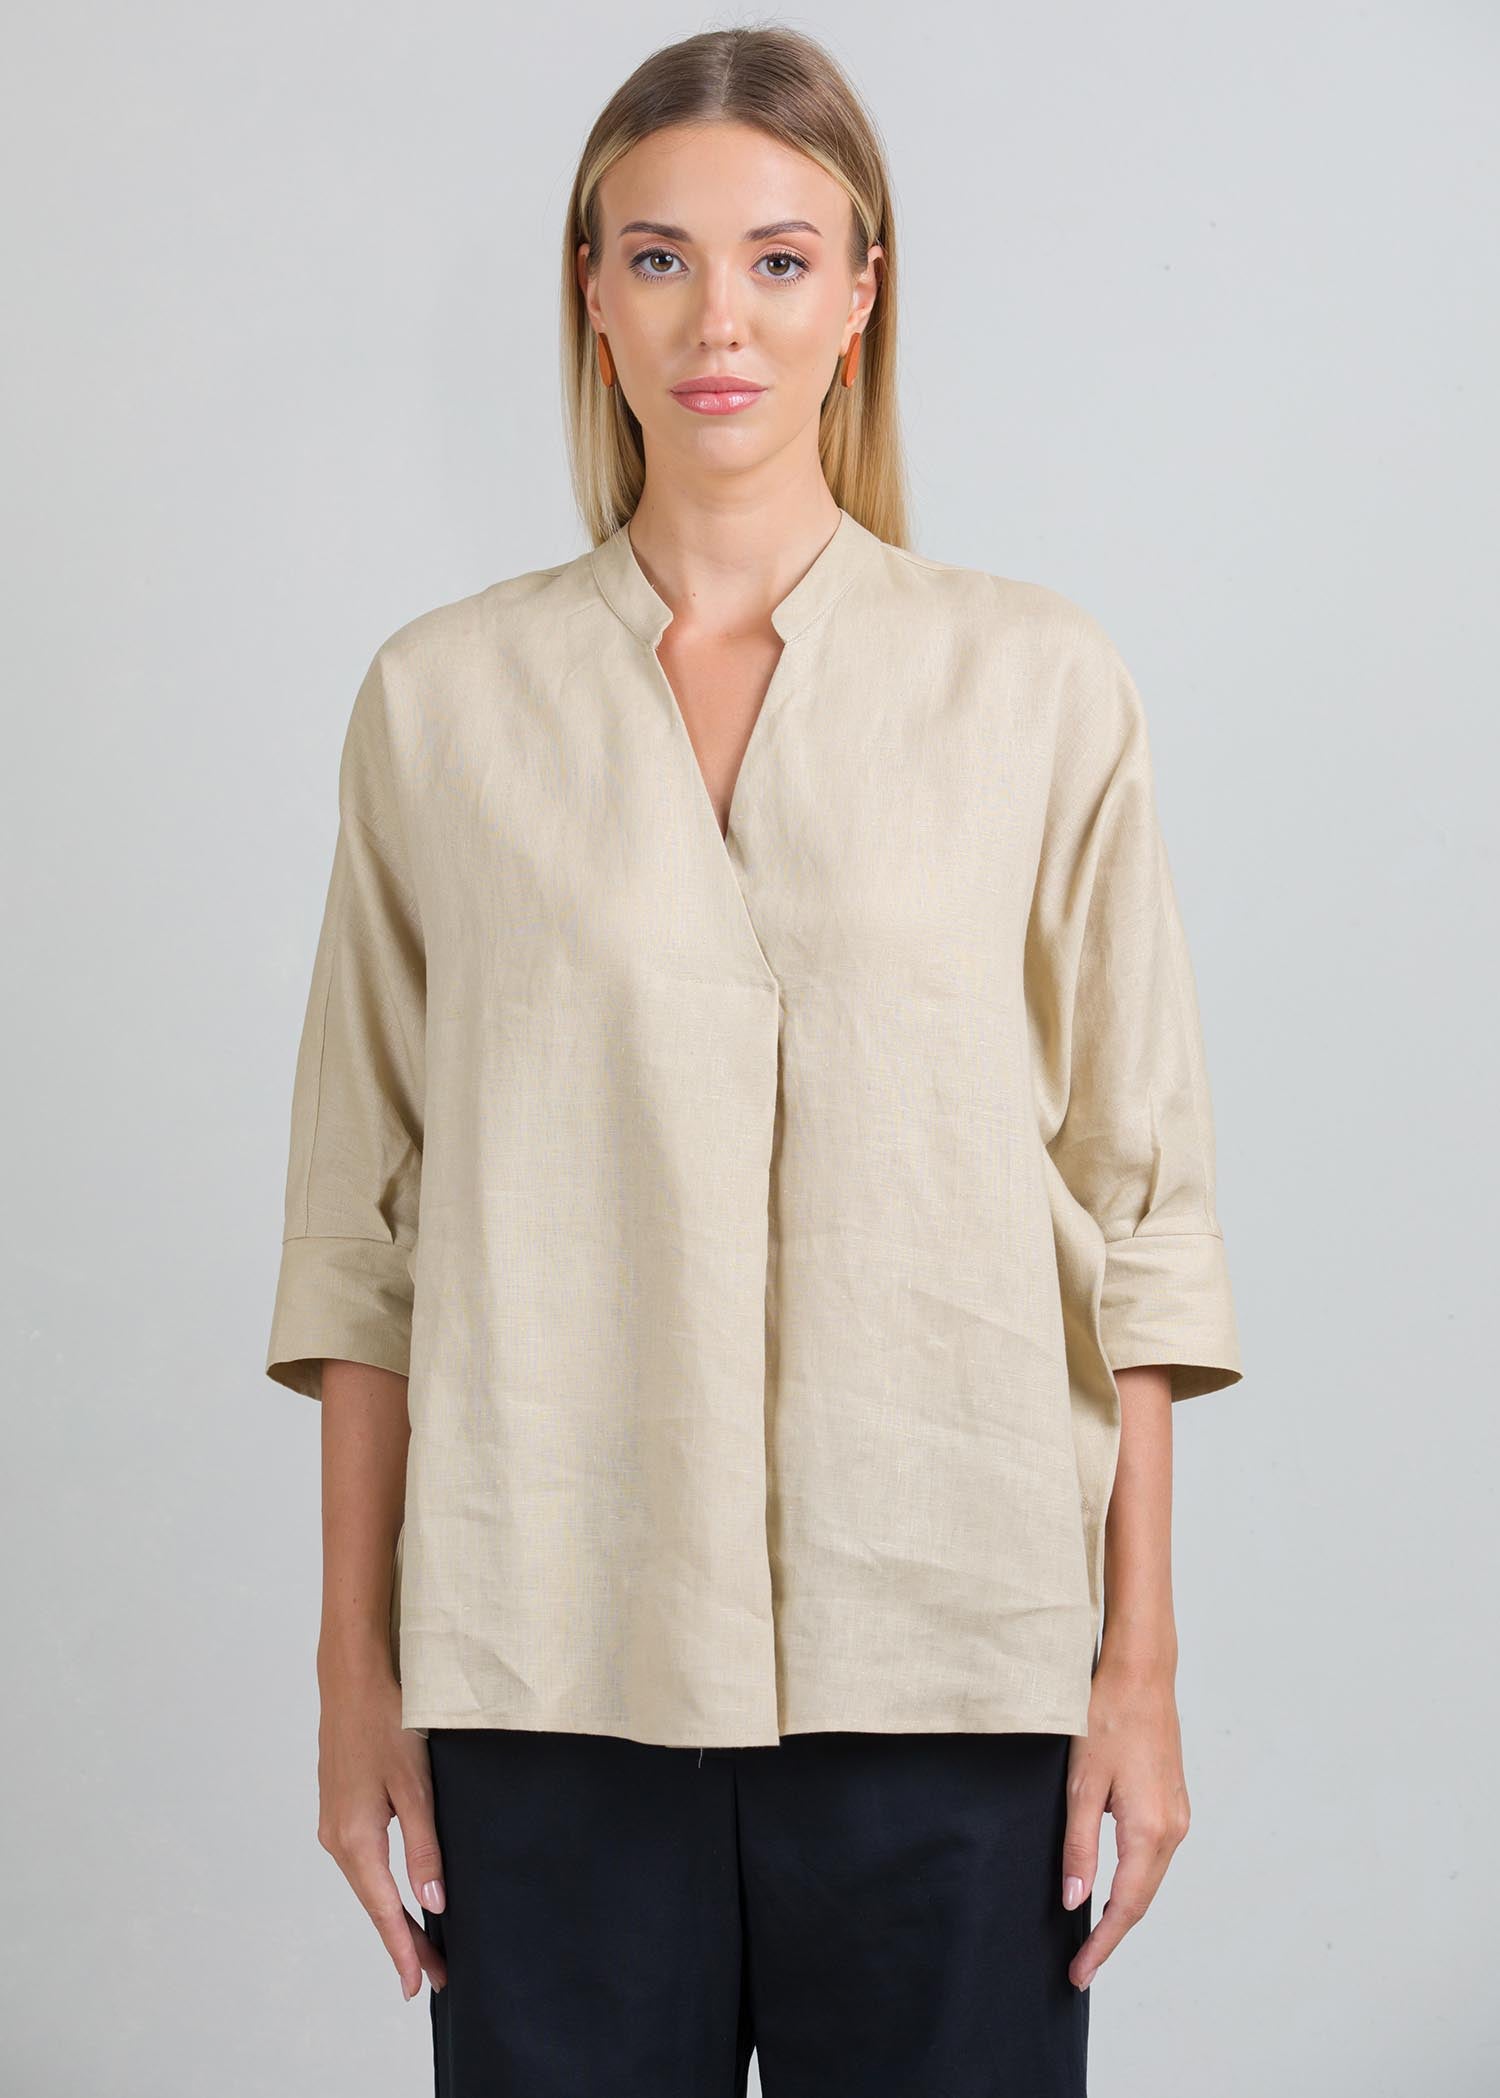 Oversized blouse with front pleat